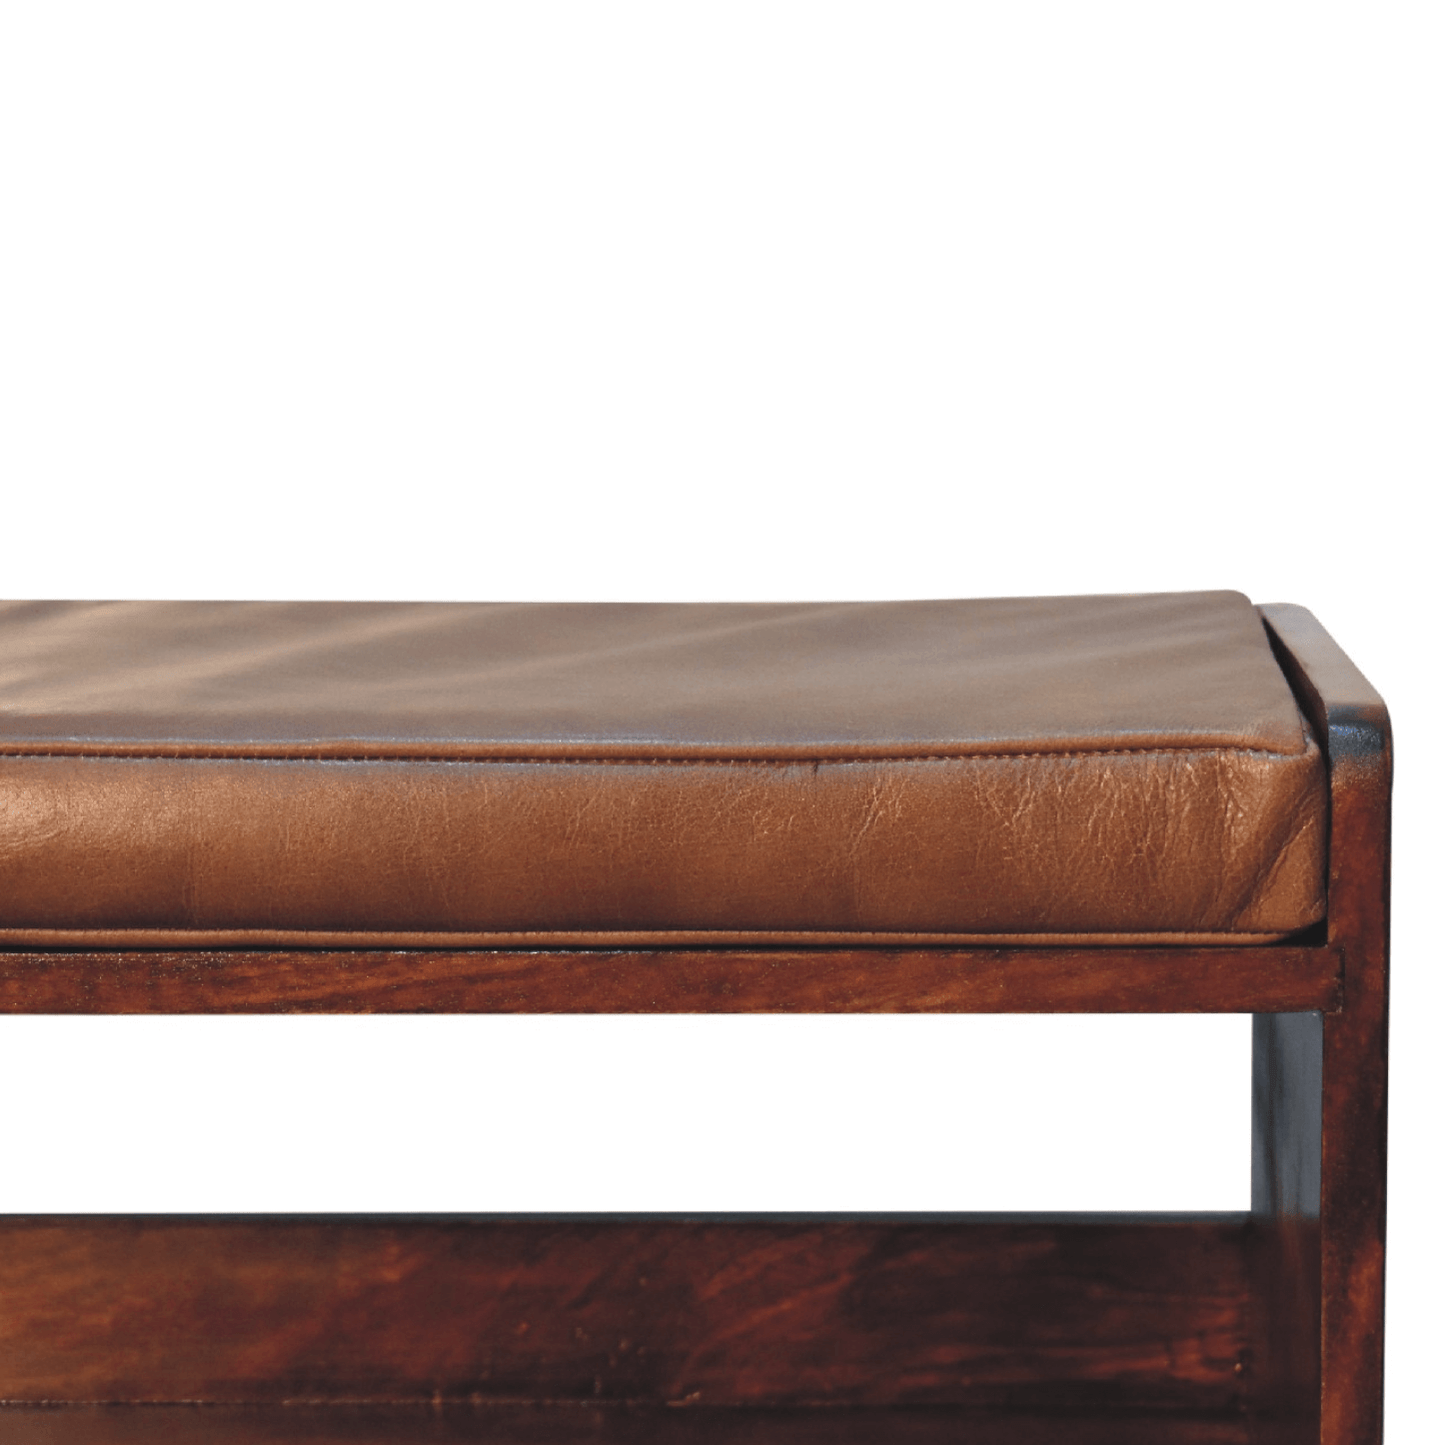 MCM Styled Solid Wood 2 Tier Bench with Leather Seat, Chestnut 35" - Revel Sofa 